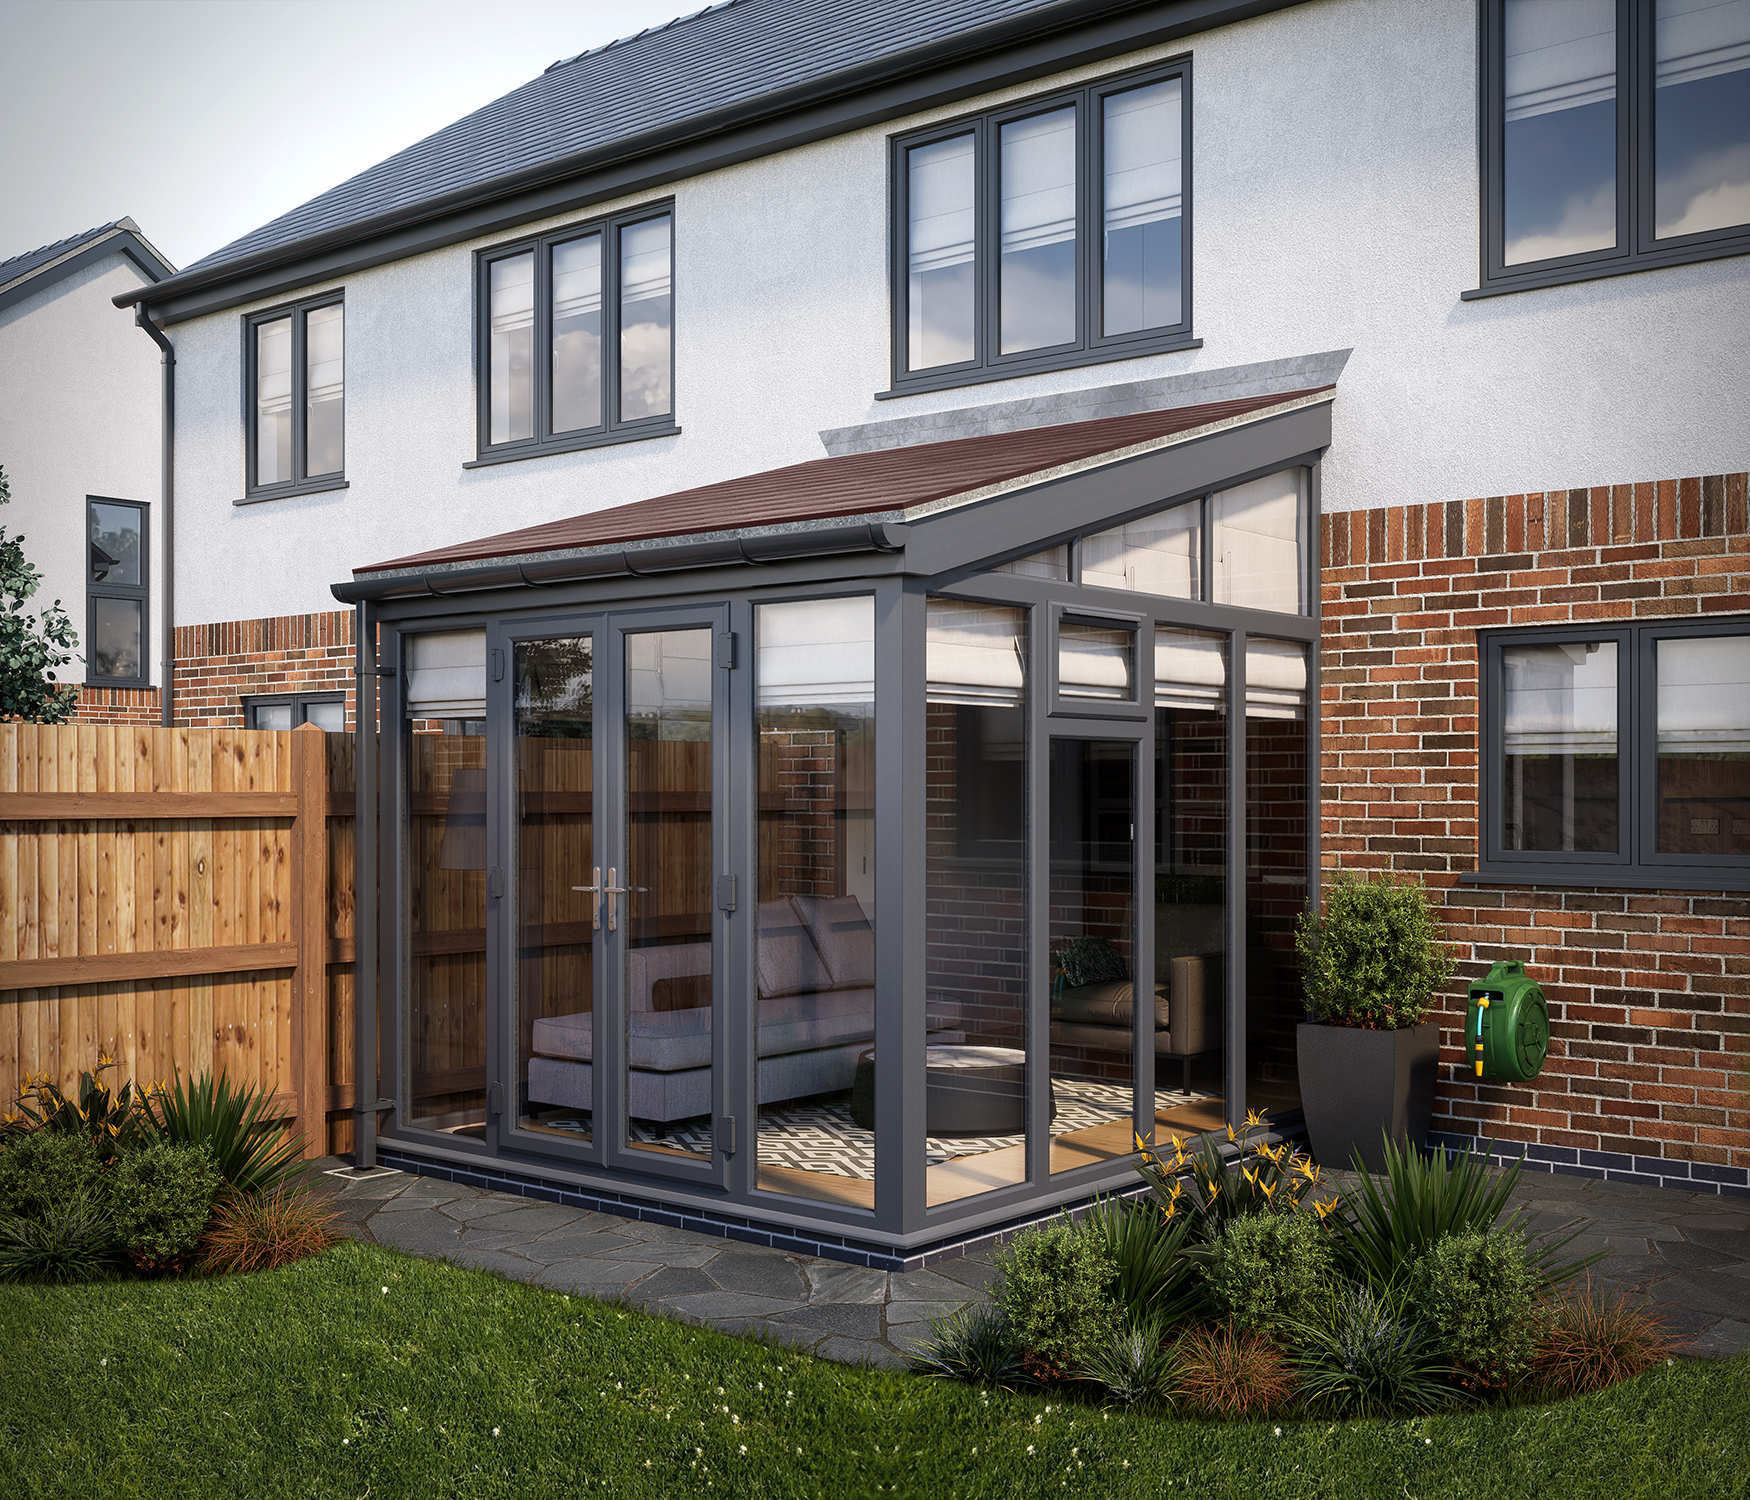 Image of SOLid Roof Full Height Lean to Conservatory Grey Frames with Rustic Brown Tiles - 10 x 10ft